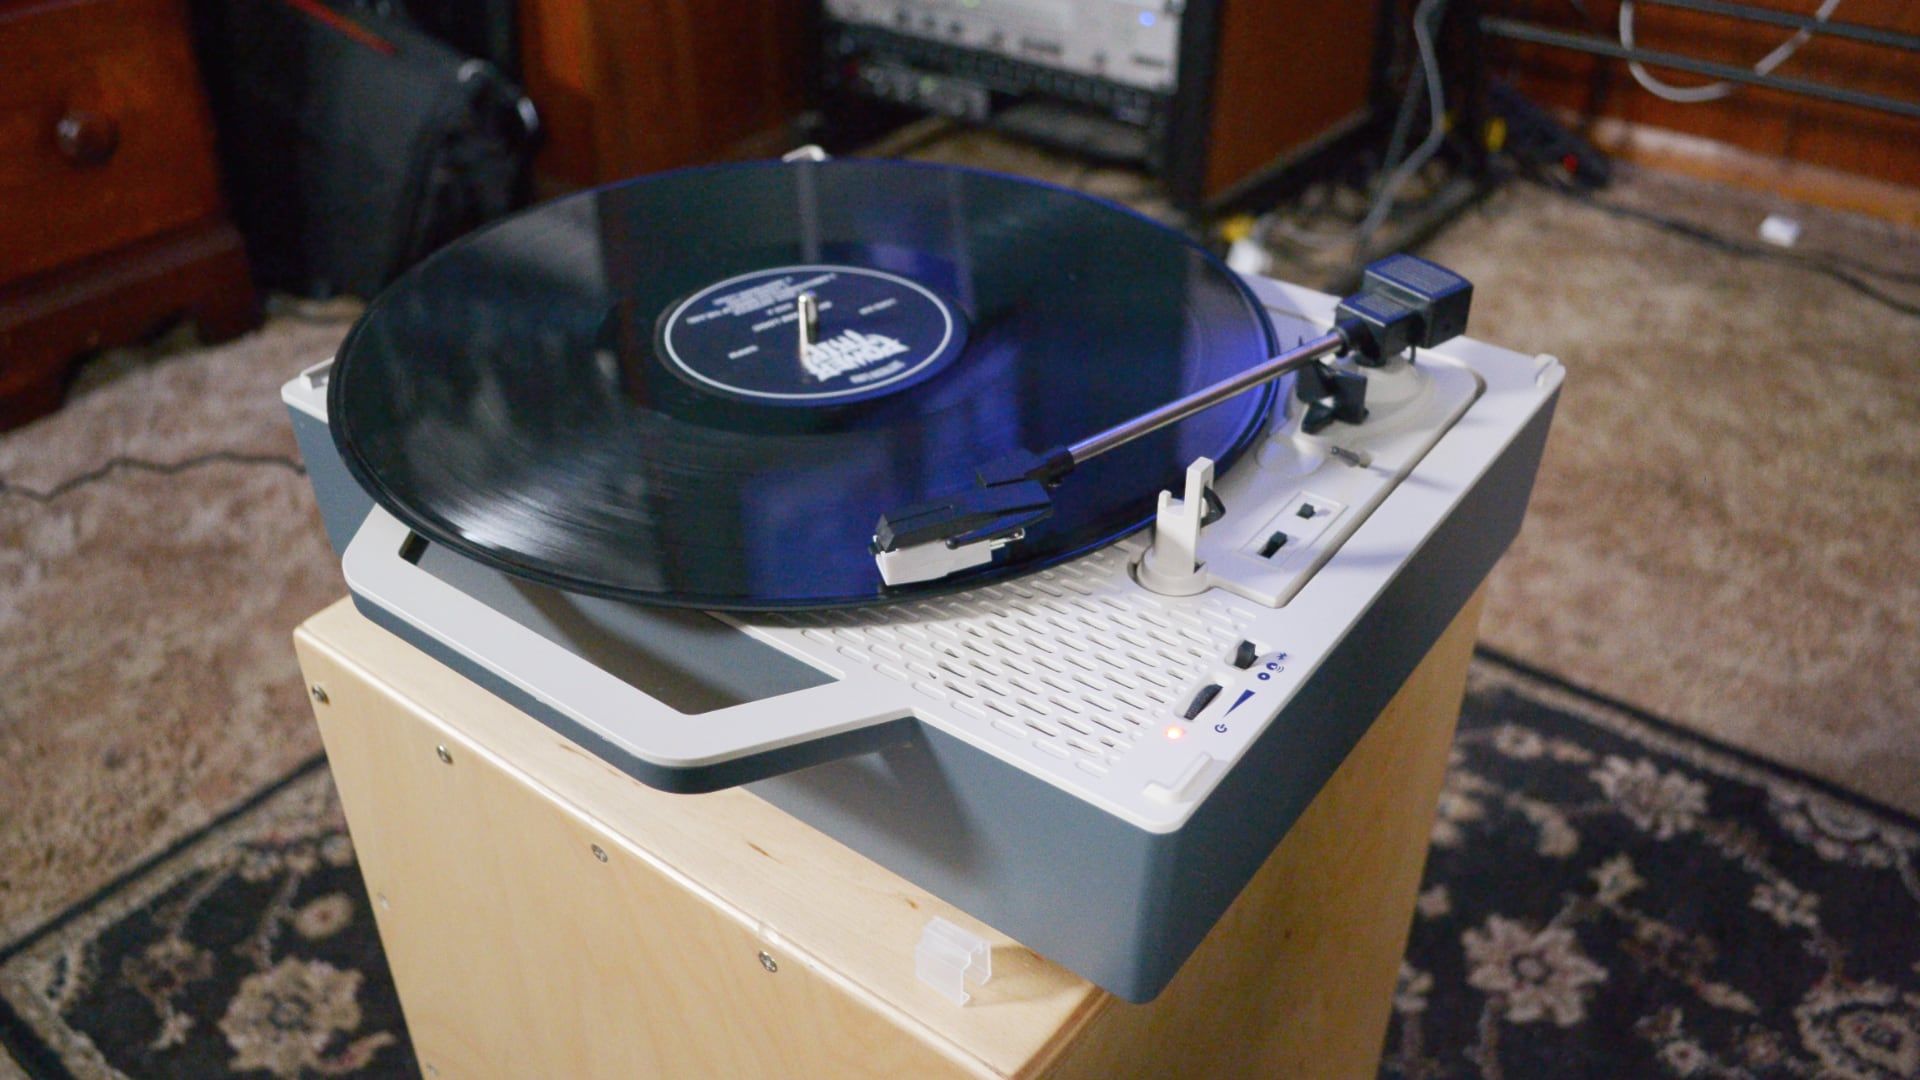 Victrola Re-Spin playing a record